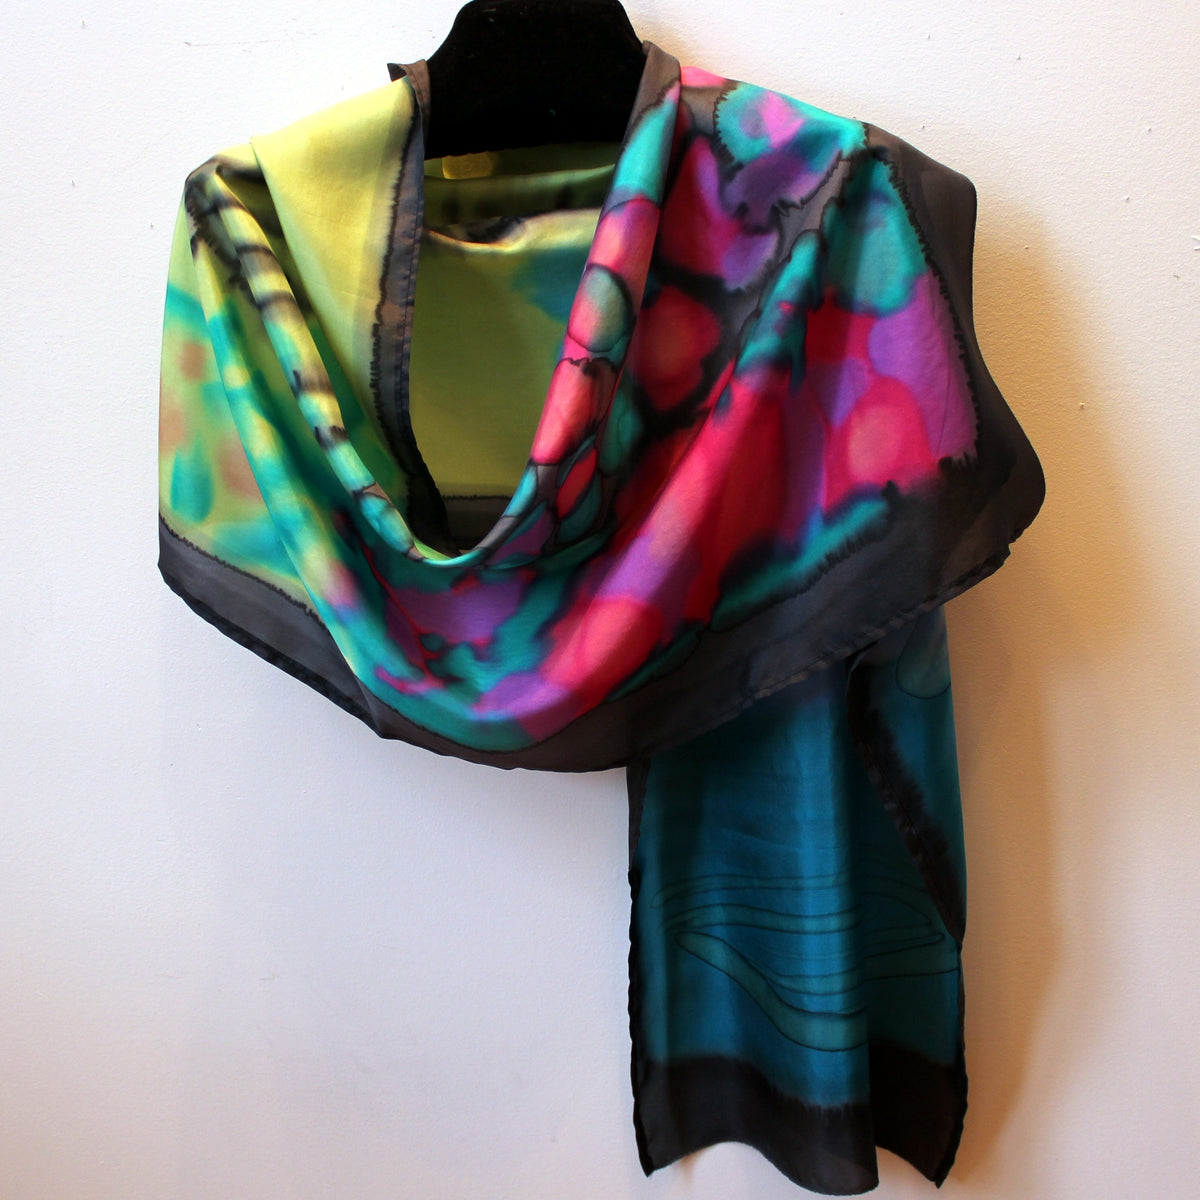 Silk Scarves Online Shop - Hand Painted Silk Scarf. Olive, Navy Blue,  Turquoise, White Handmade Silk Scarf DENIM CHIC. Silk Scarves Colorado.  Extra-Large 35x35 square. Holidays